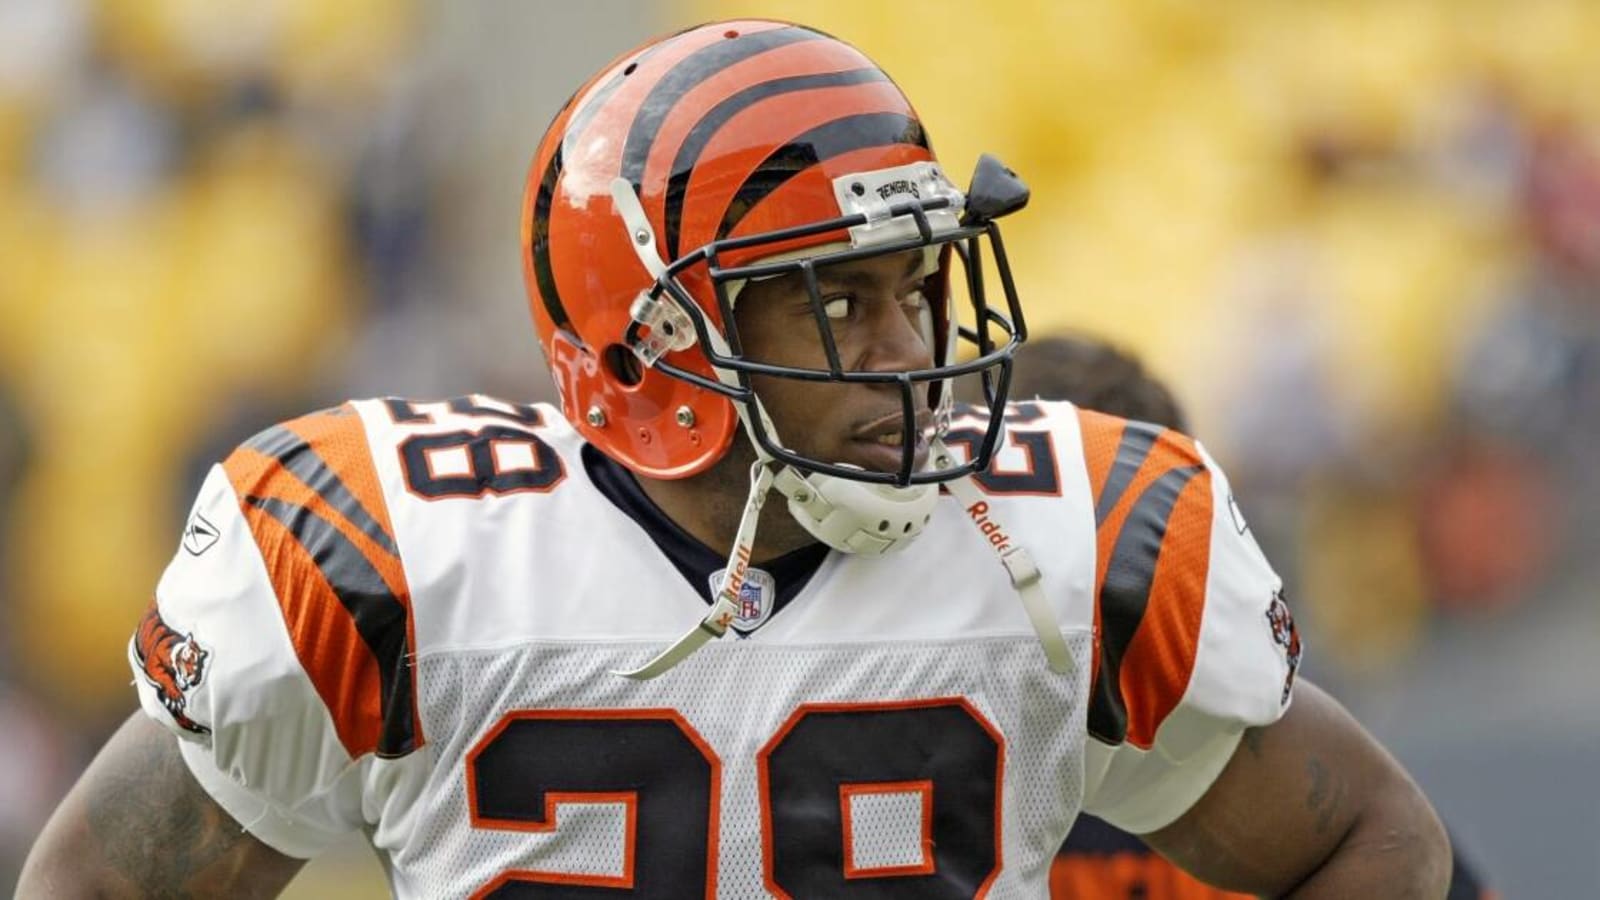 Former Bengals RB Corey Dillon clears the air on harsh comments about Ring of Honor snub